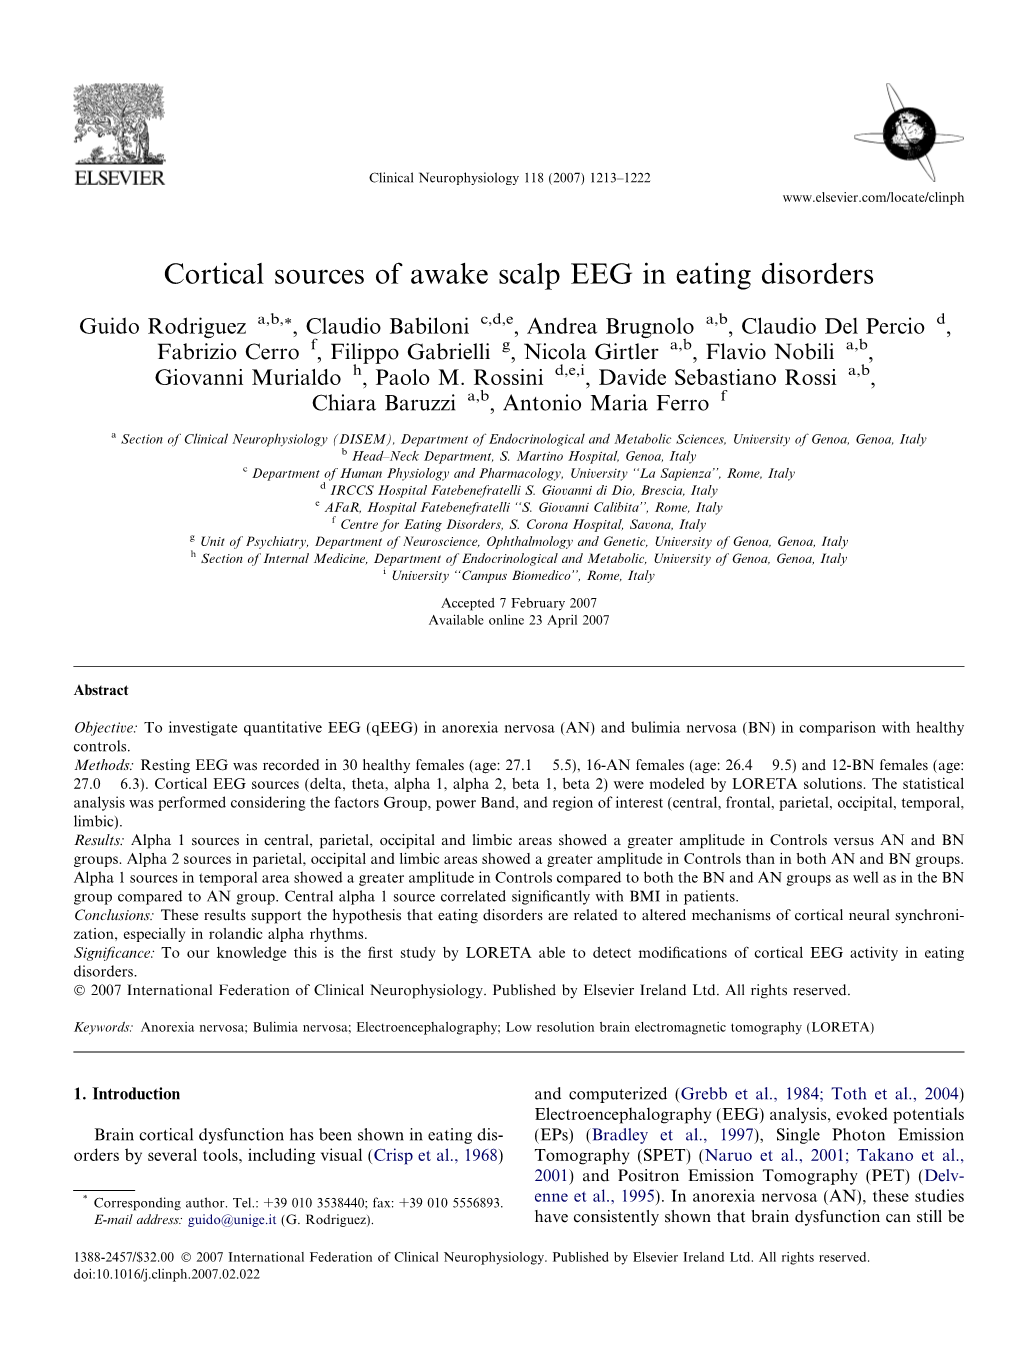 Cortical Sources of Awake Scalp EEG in Eating Disorders